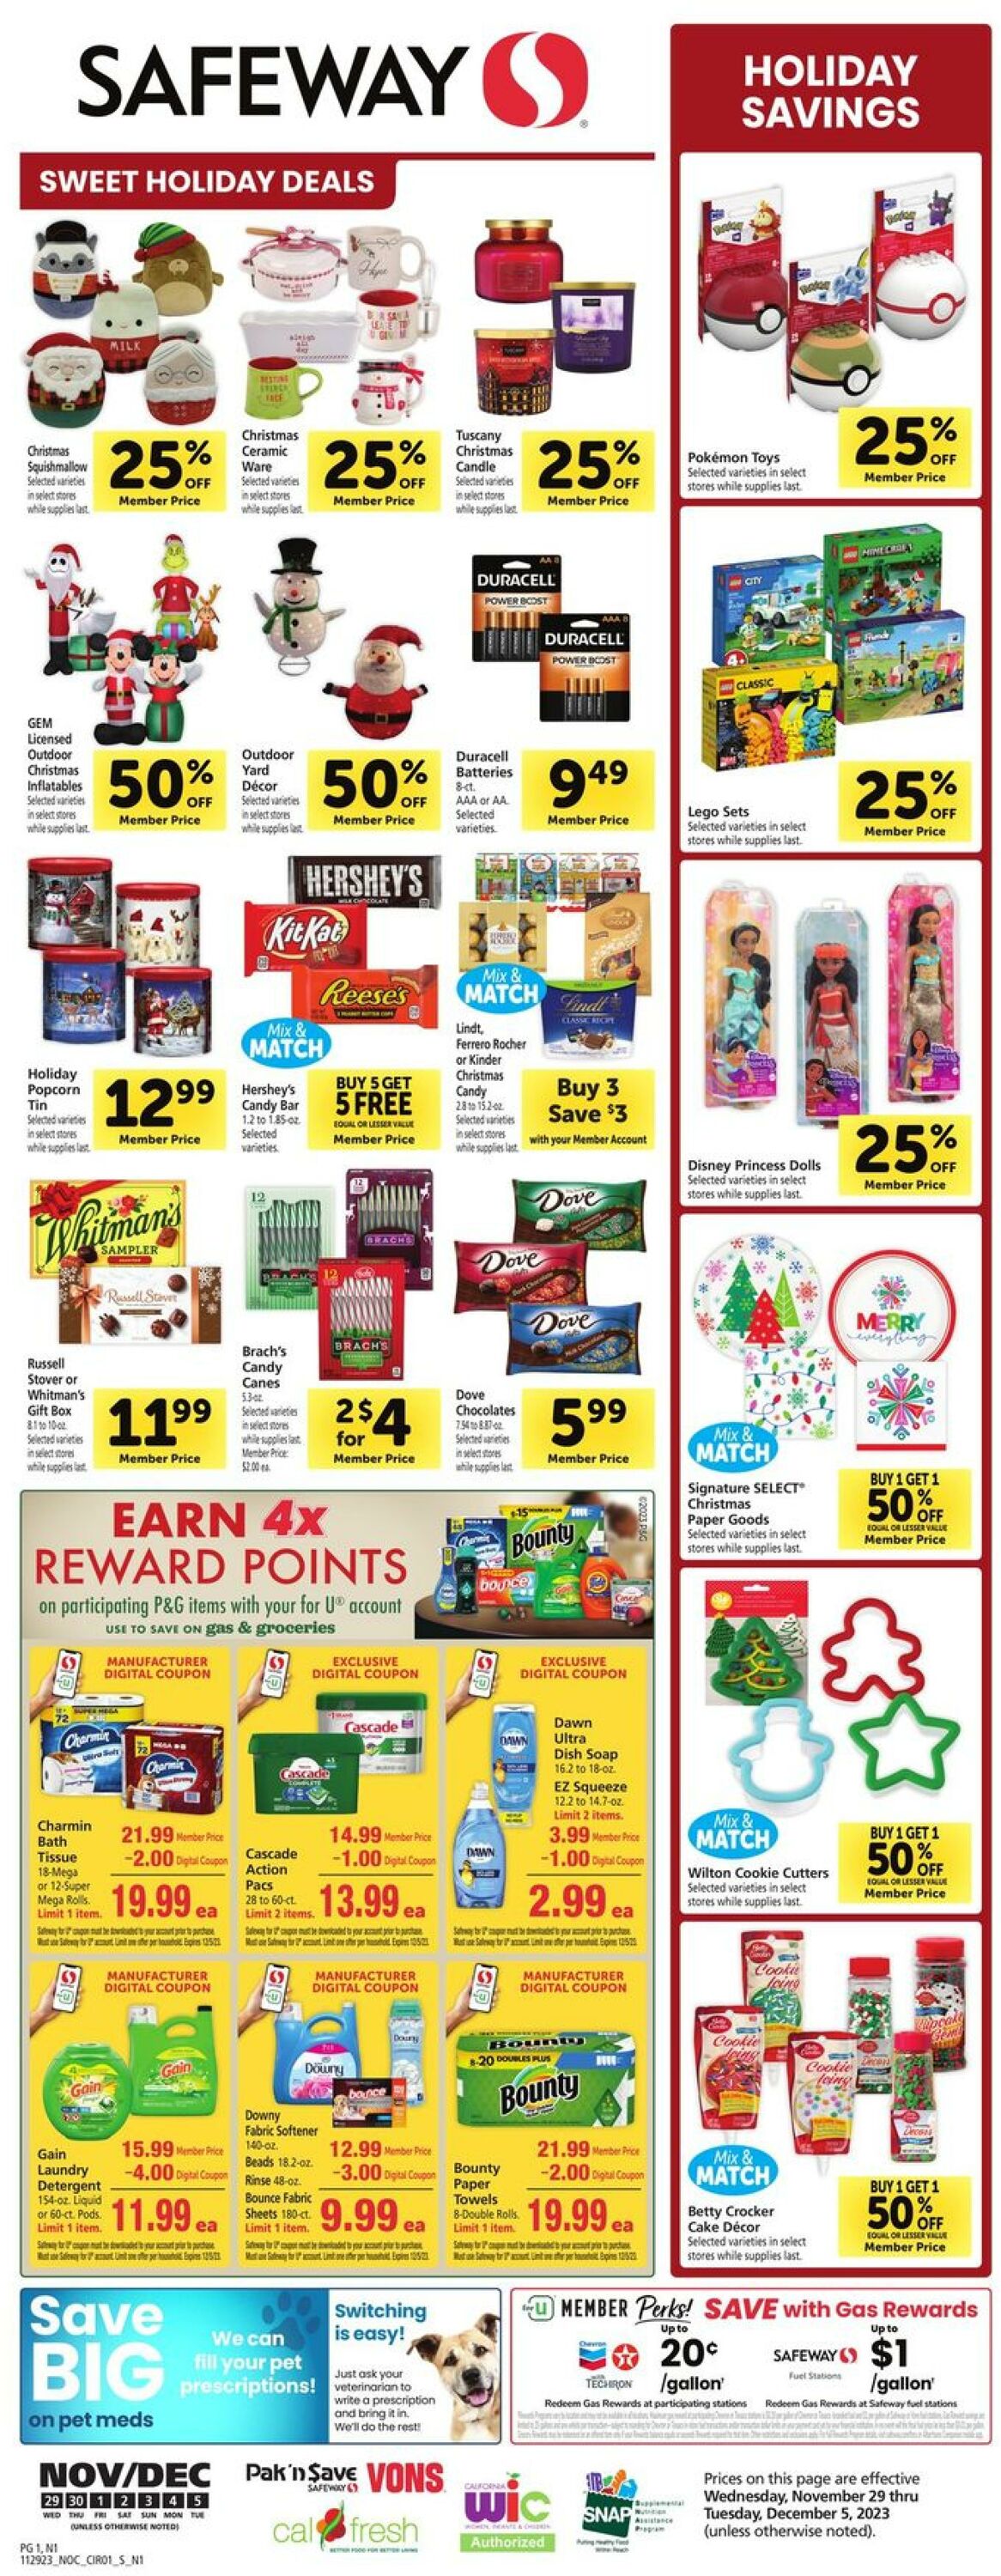 Safeway Promotional weekly ads